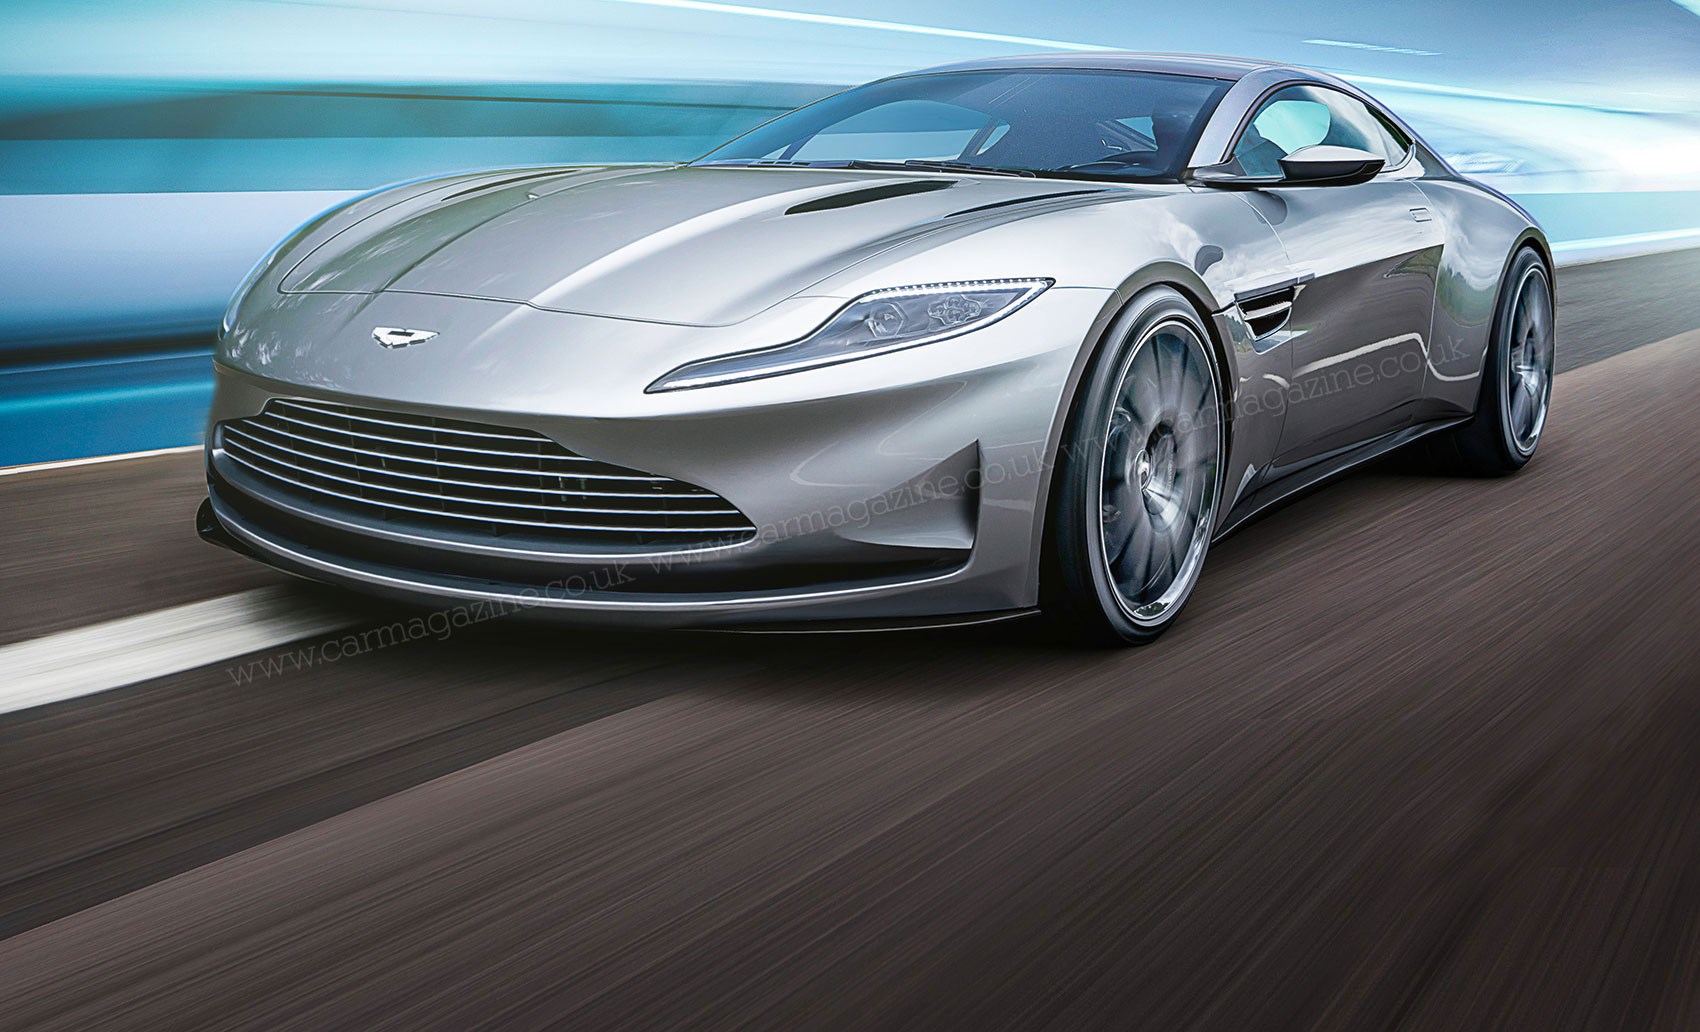 Unveiling the DB11: The new face of Aston Martin